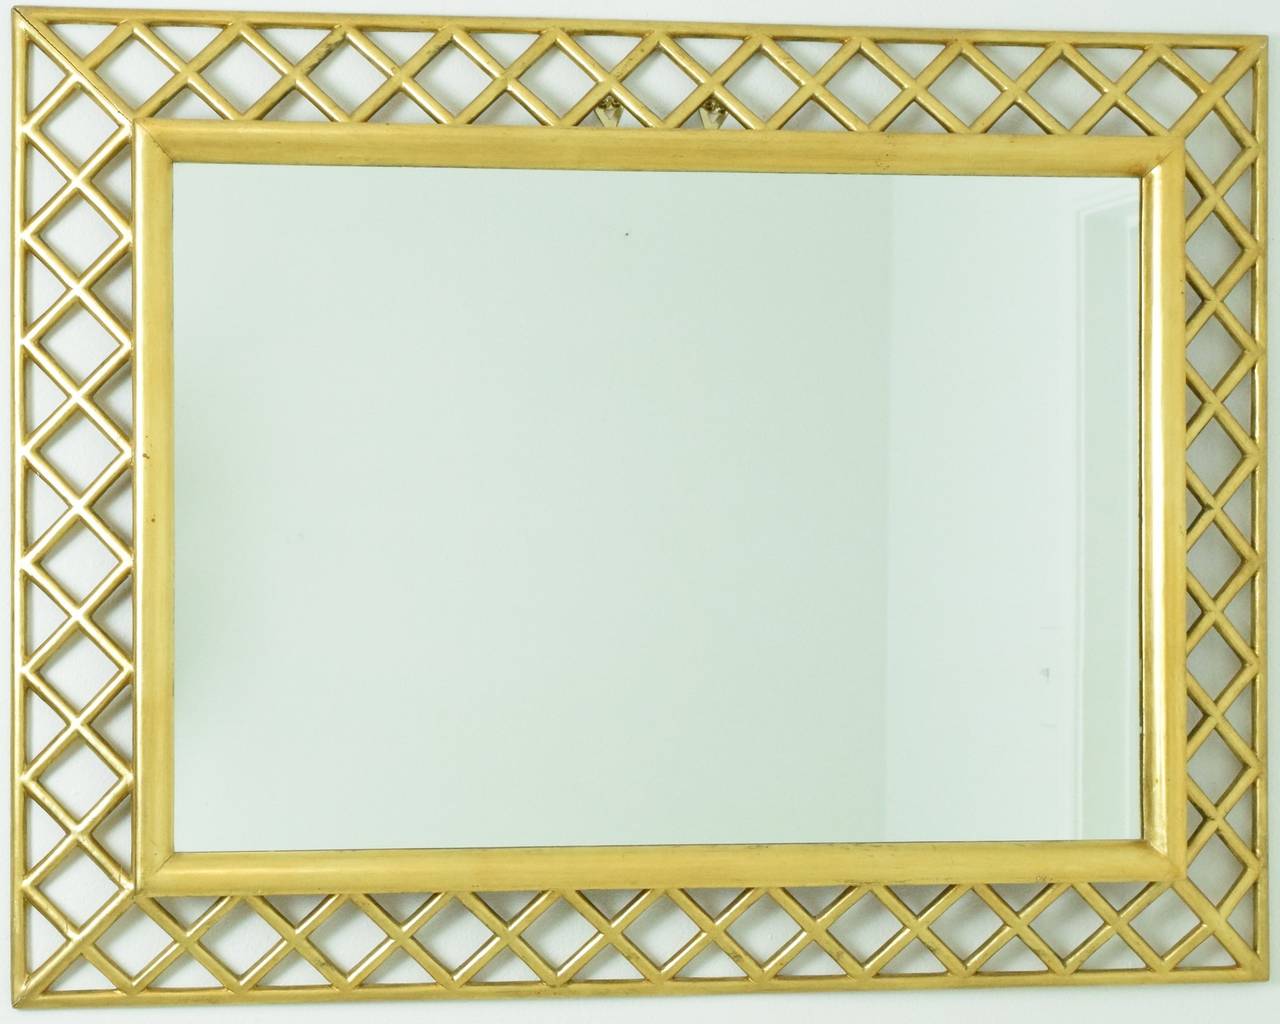 Handsome Italian mirror with giltwood carved lattice frame.